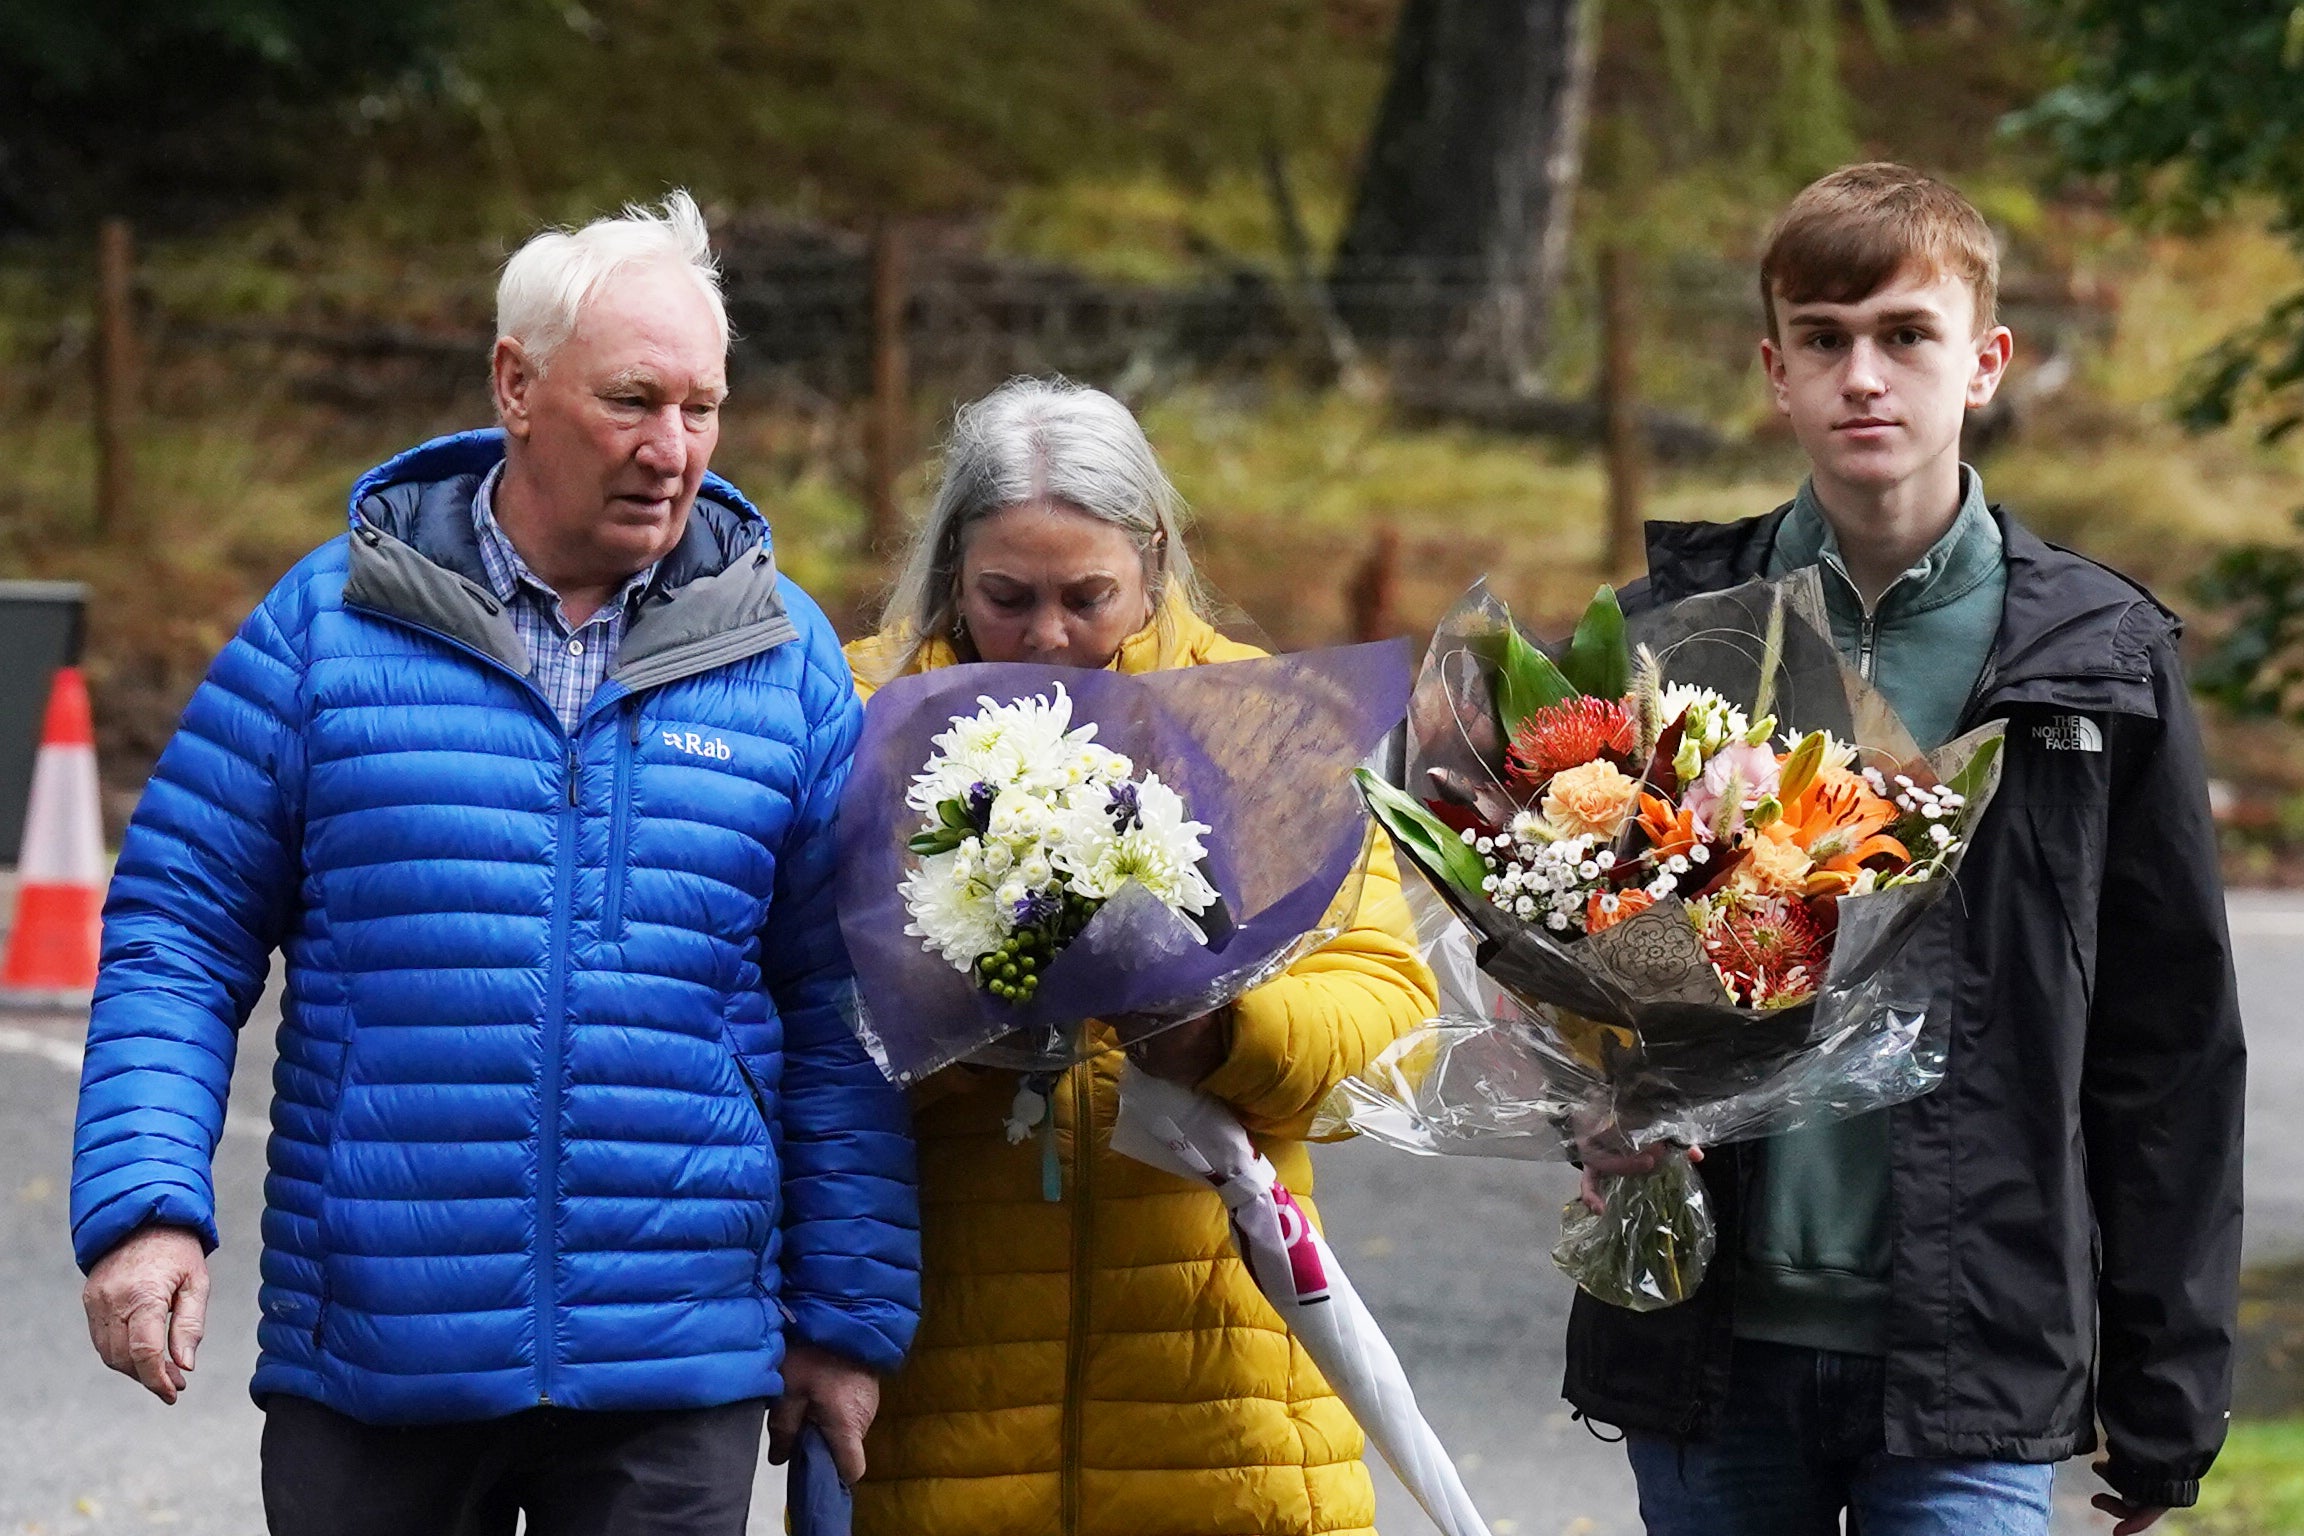 Mourners arrive with flowers at Balmoral, where the Queen died on Thursday afternoon (Owen Humphreys/PA)